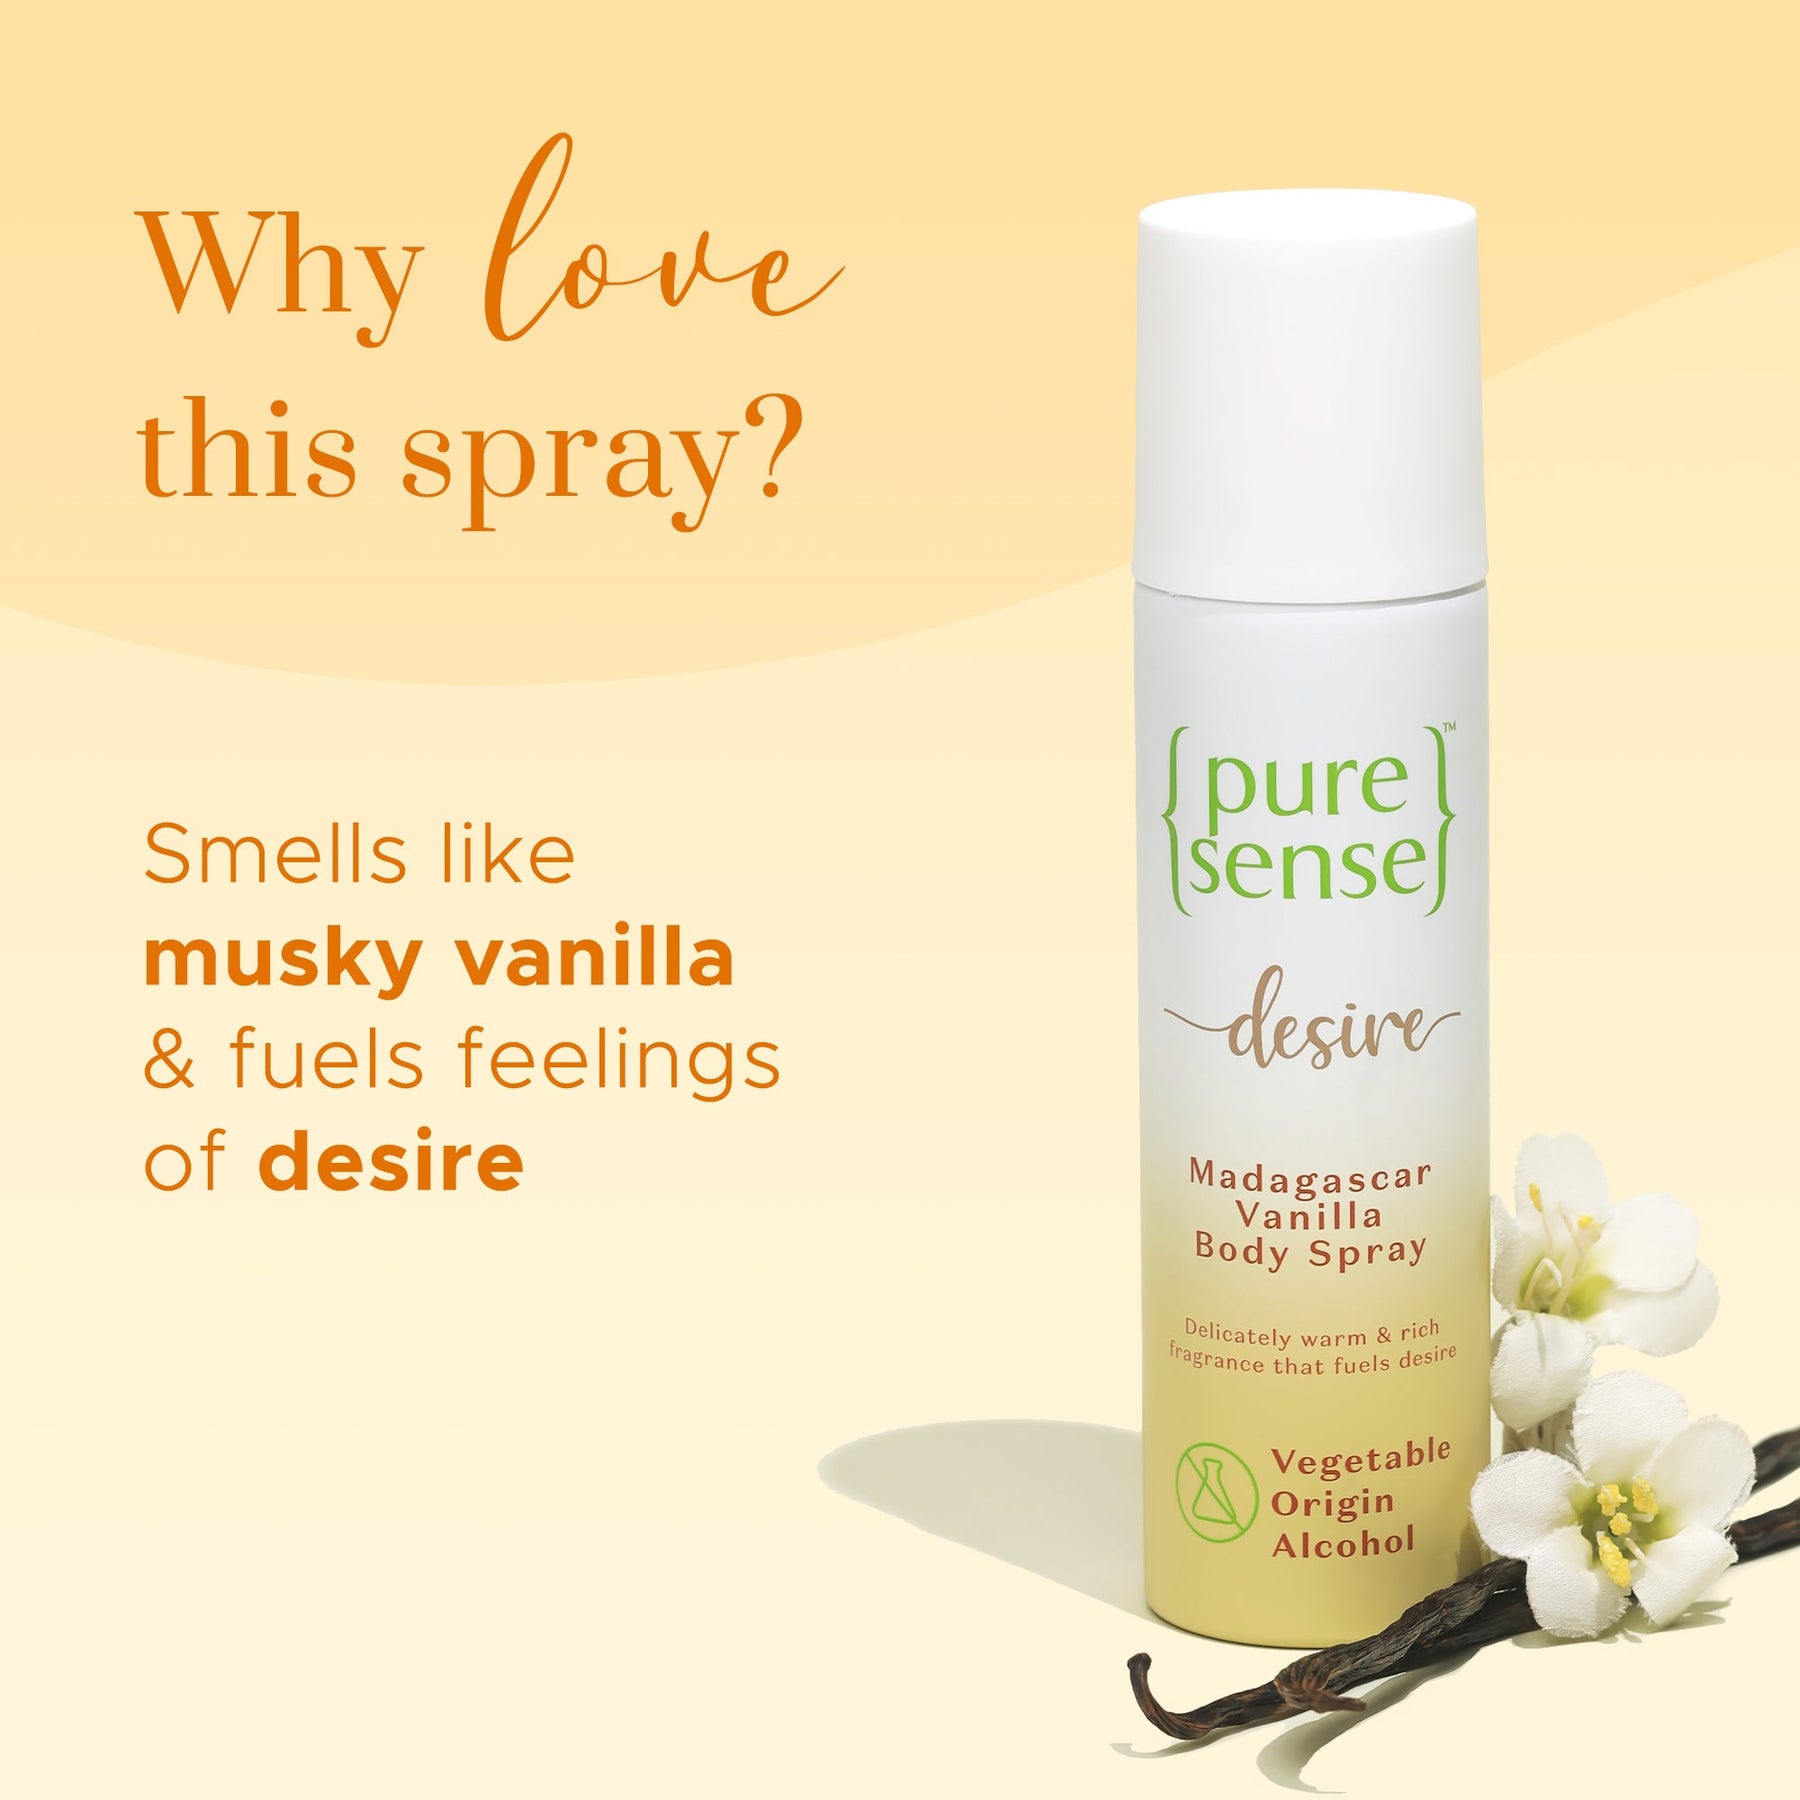 [Freebie] Desire Madagascar Vanilla Body Spray | Sulphate & Paraben Free |  From the makers of Parachute Advansed | 150ml